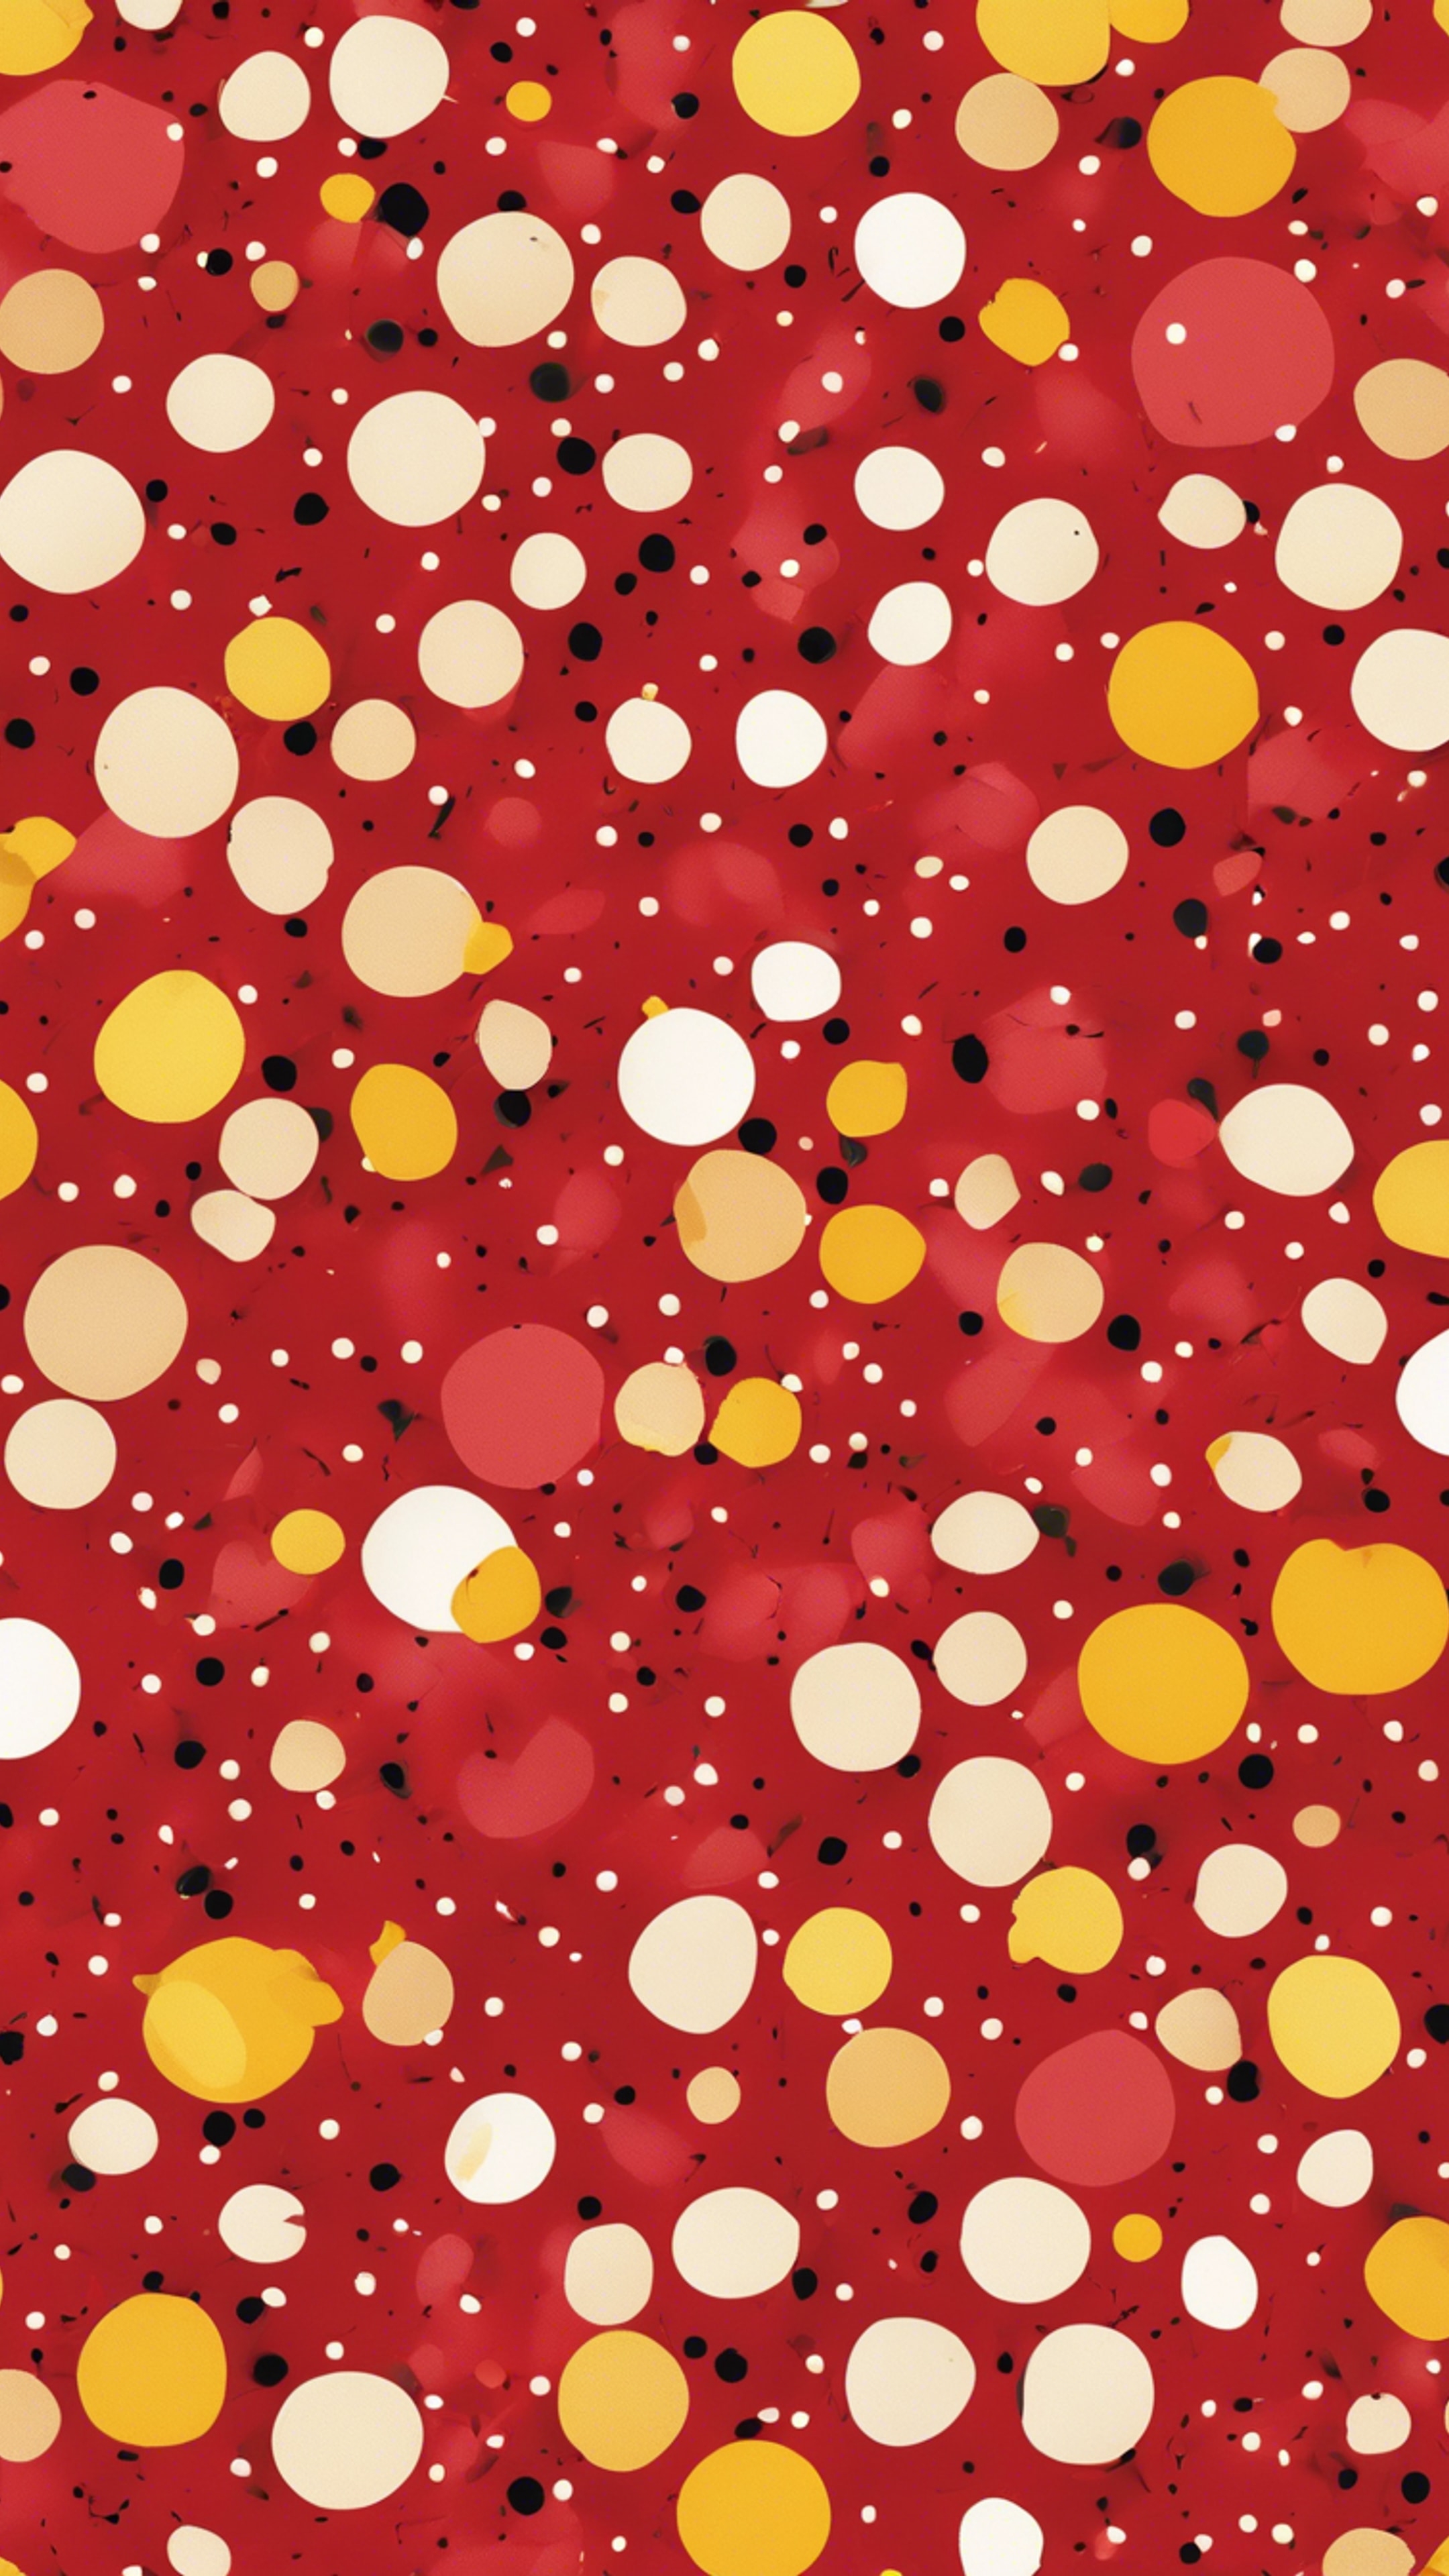 A seamless pattern of vibrant red and vivid yellow, polka dots scattered randomly. Hintergrund[206bafc01adc43569588]